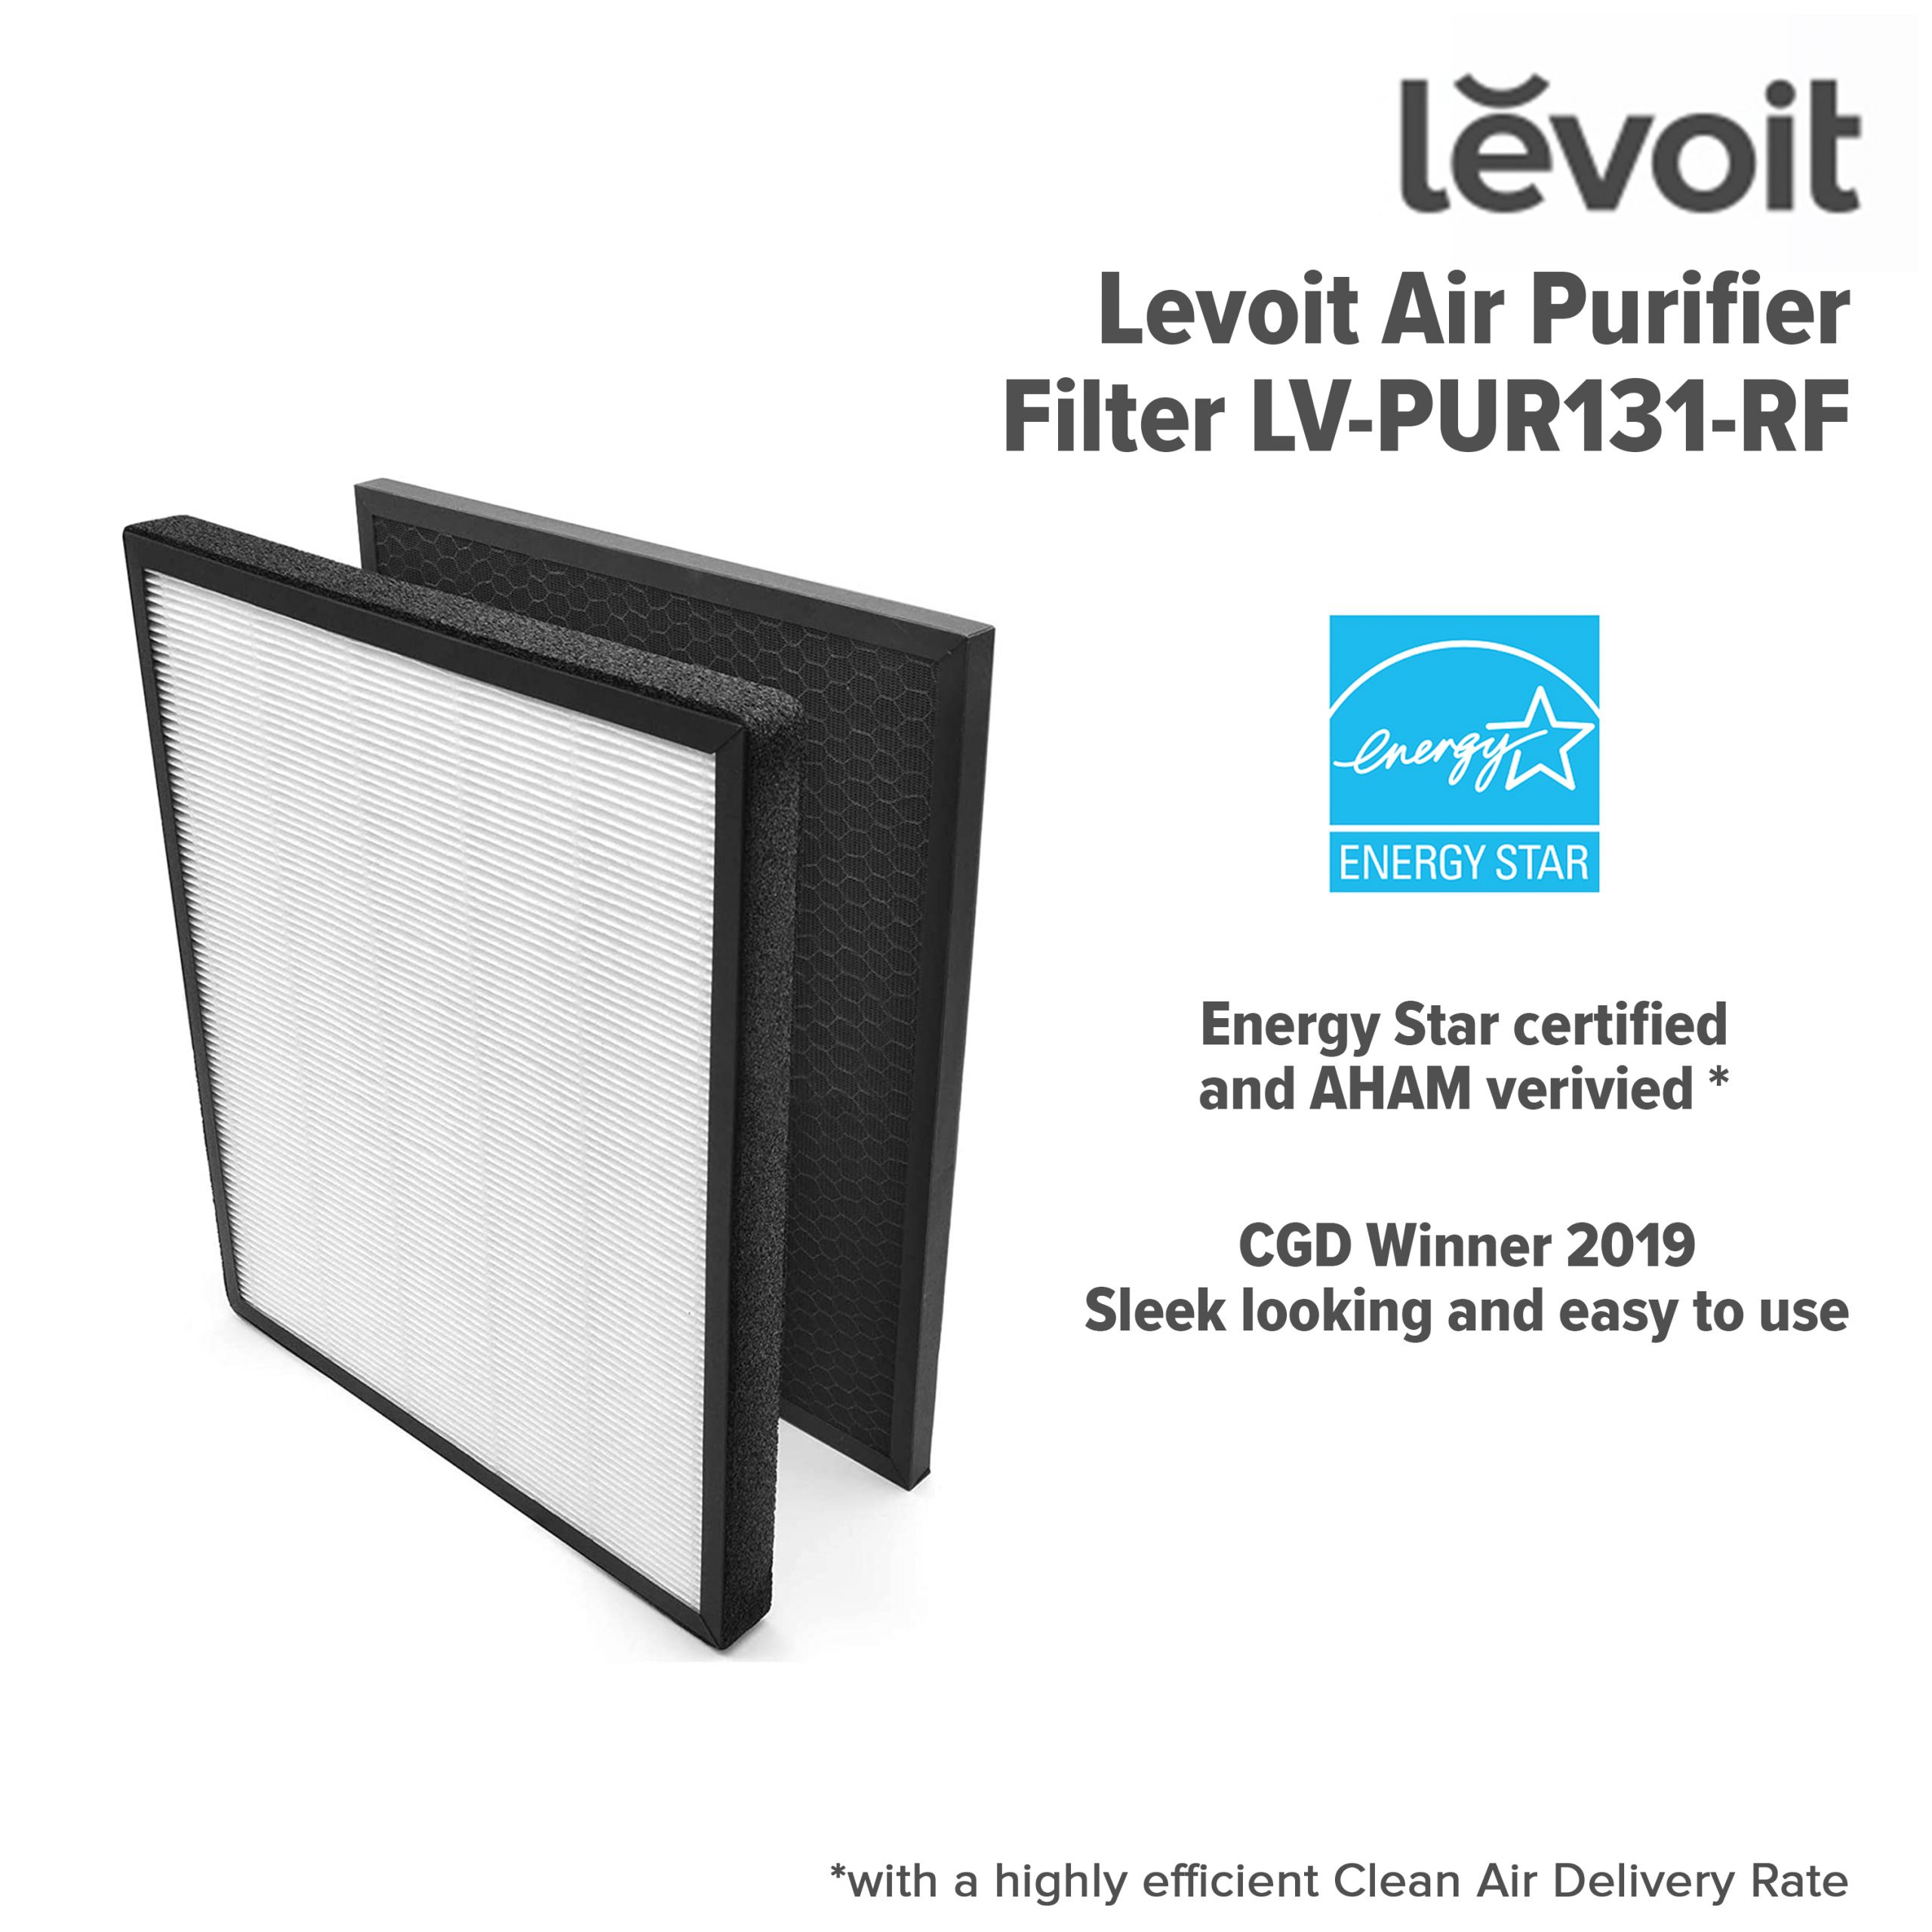  LV-Pur131 Replacement Filters for Levoit LV-Pur131 Air  Purifier, LV-PUR131S Levoit Air Purifier - Part# LV-PUR131-RF - 2 True HEPA  and 2 Carbon Filters : Home & Kitchen